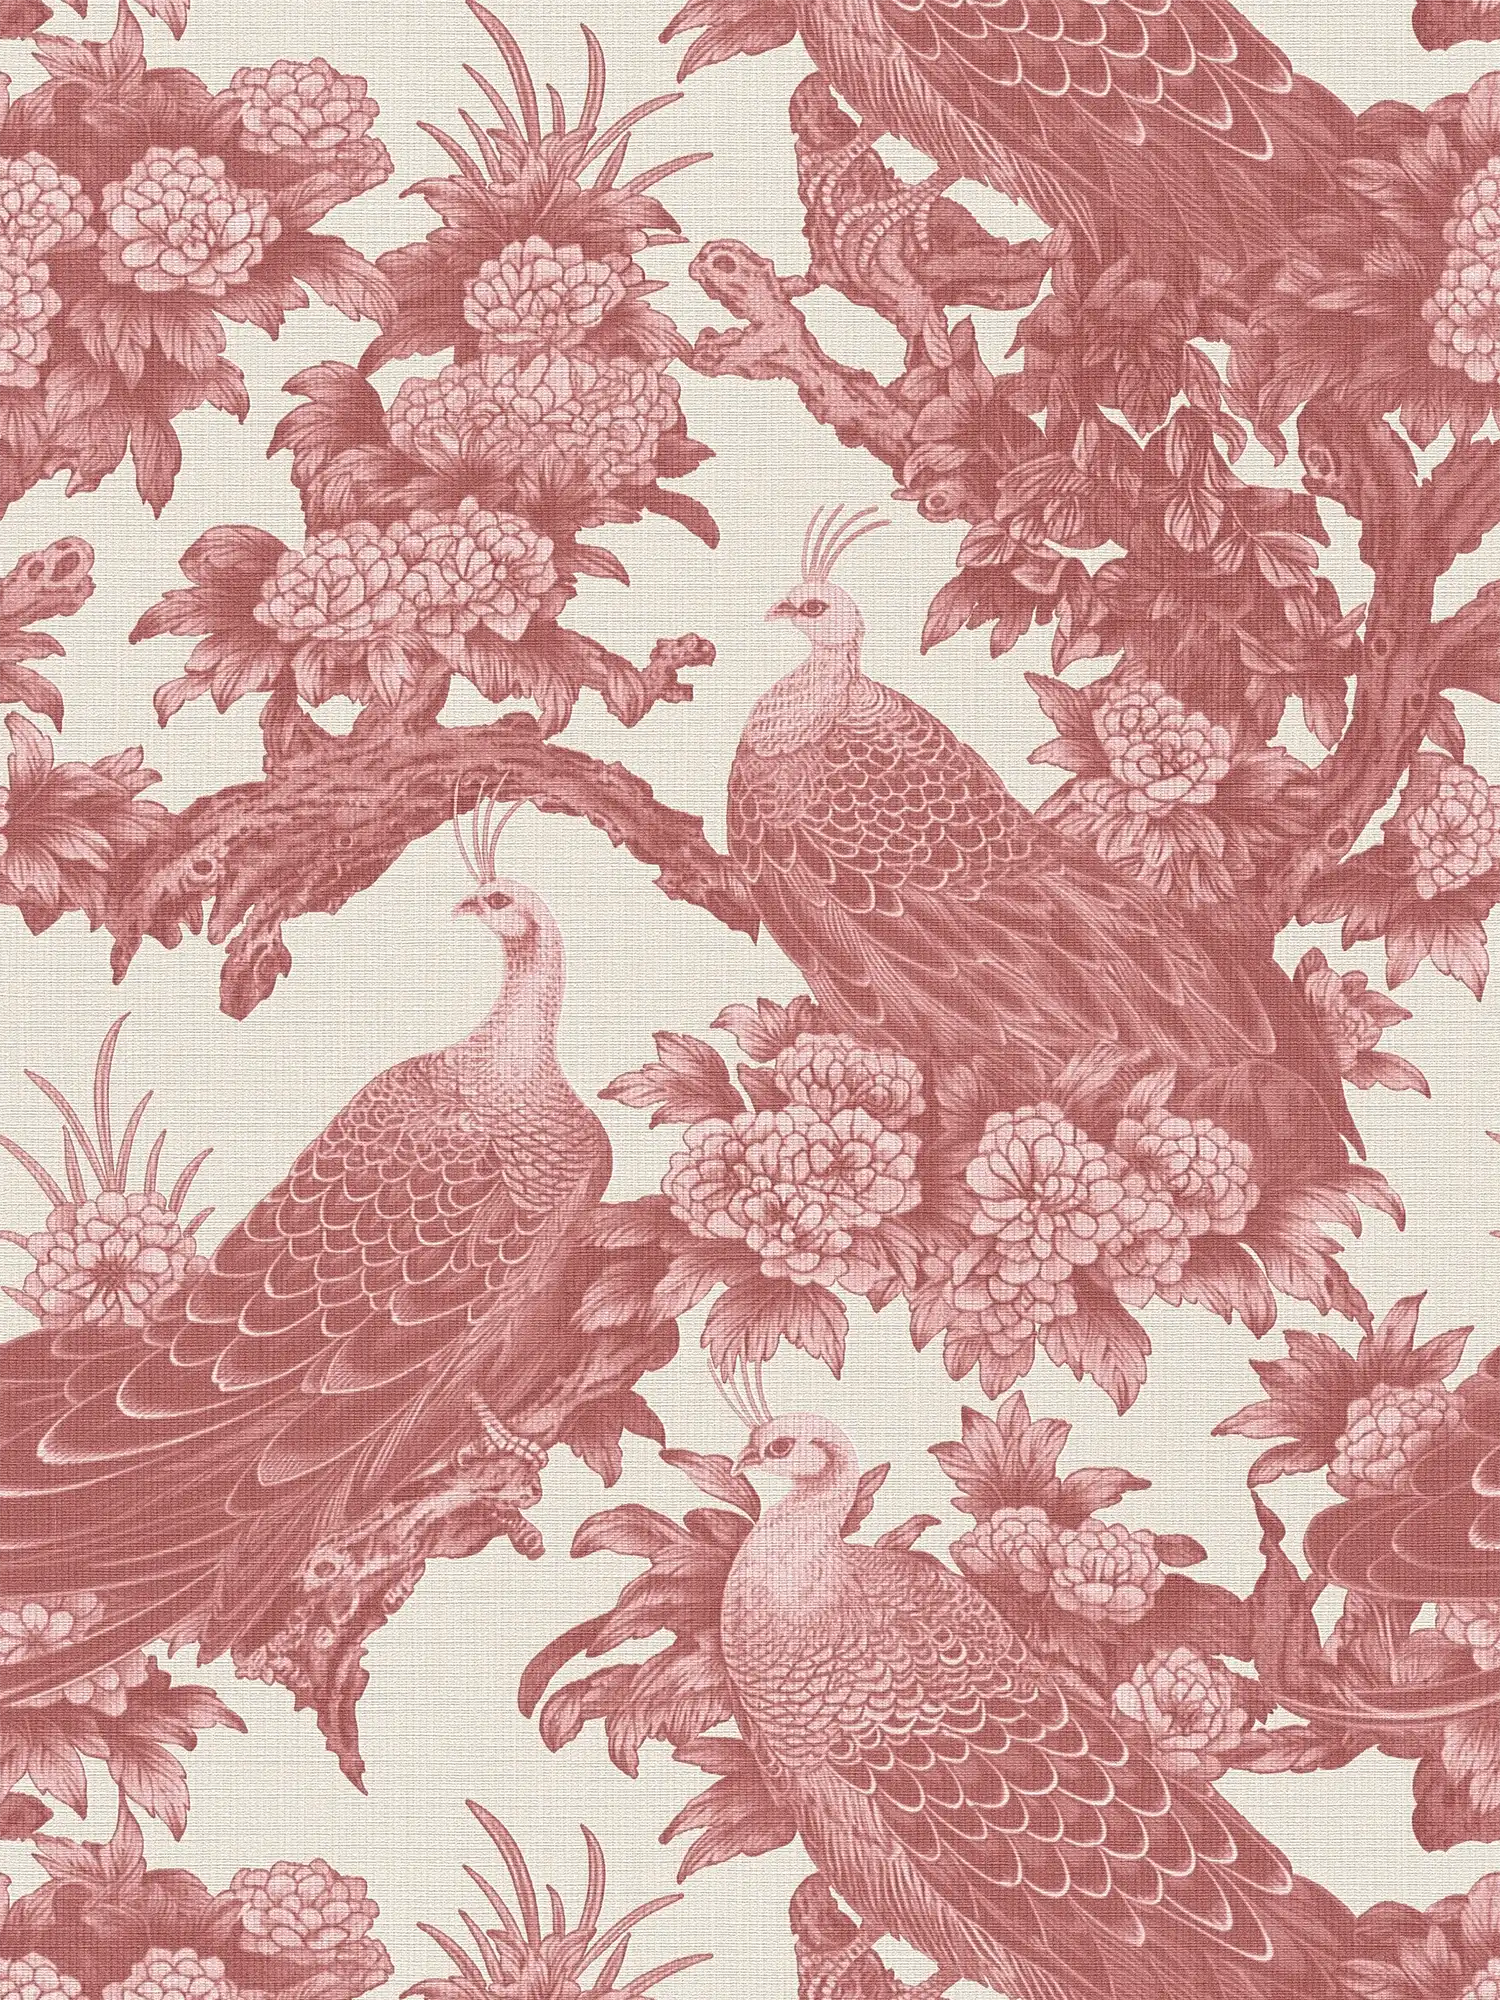 Non-woven wallpaper in English country house style with birds - red, cream, pink
